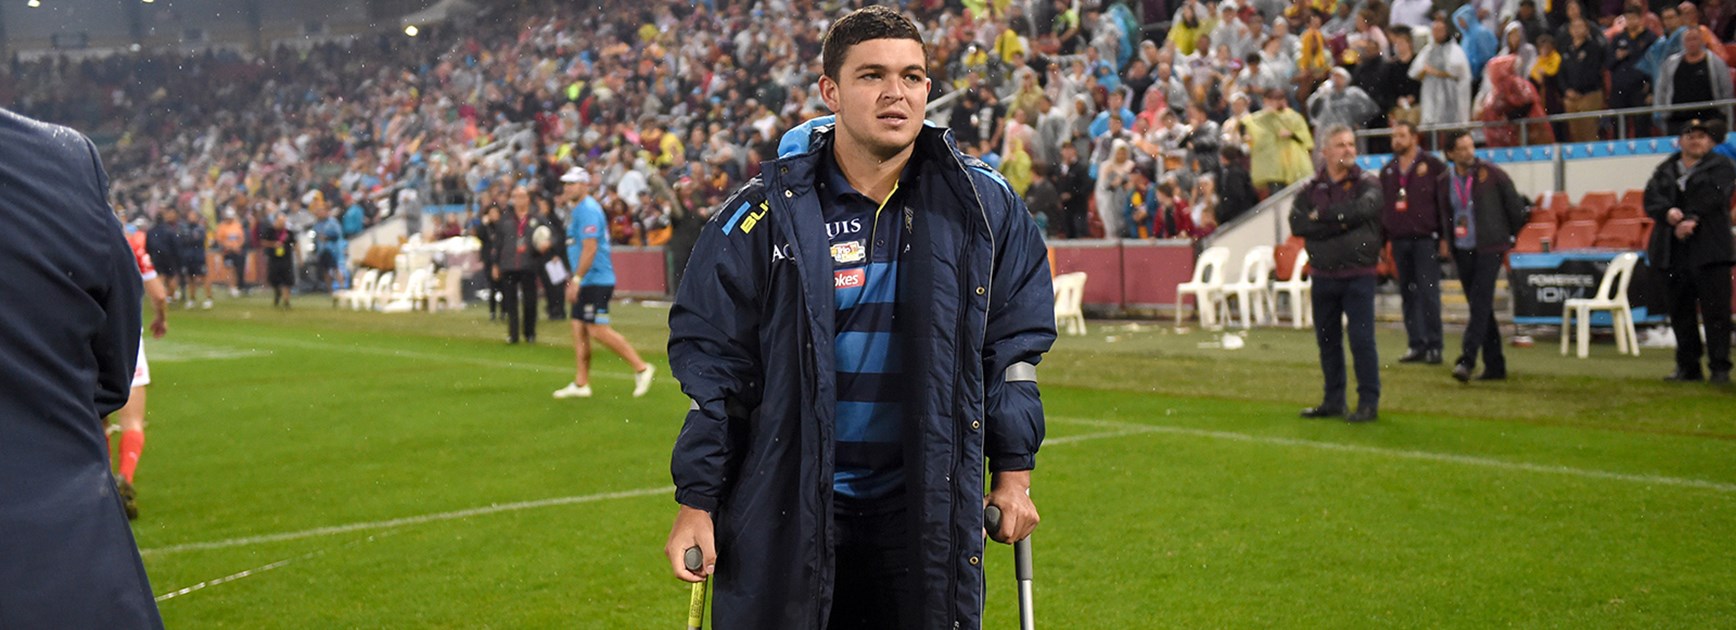 Titans halfback Ashley Taylor was injured in his side's elimination final loss to the Broncos.